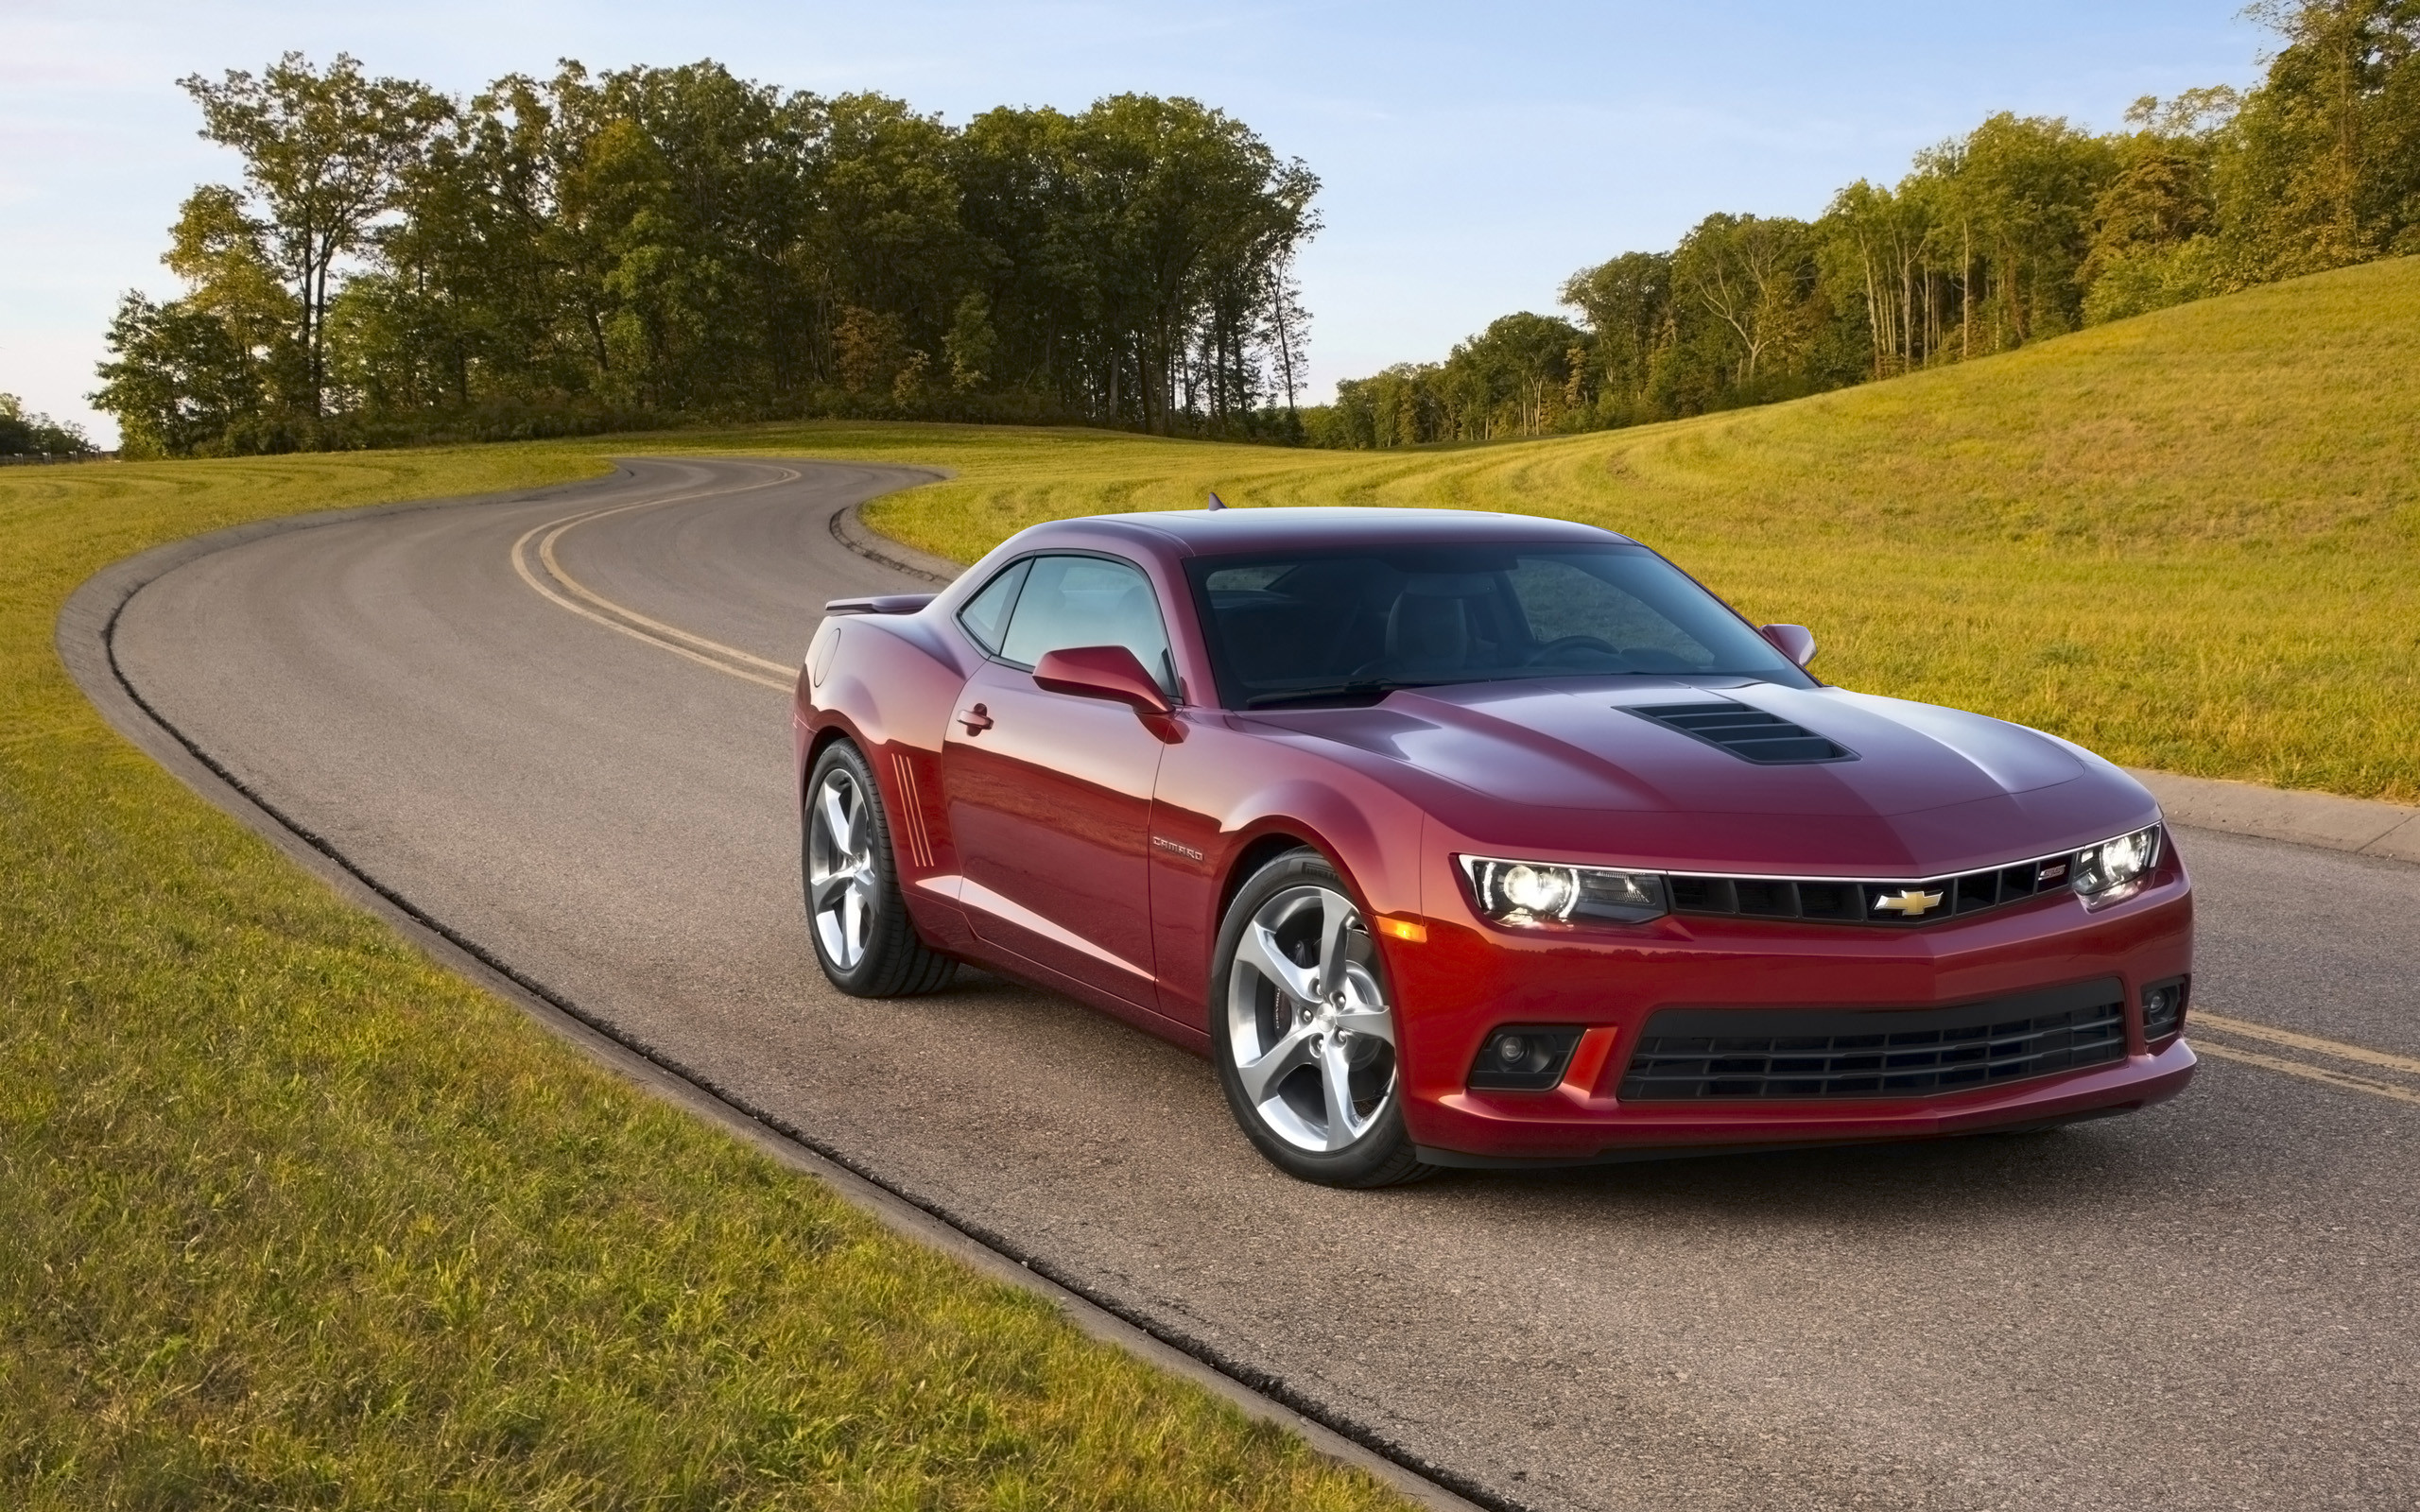 2560x1600 ... Chevy Camaro Wallpaper - Wallpapers Browse